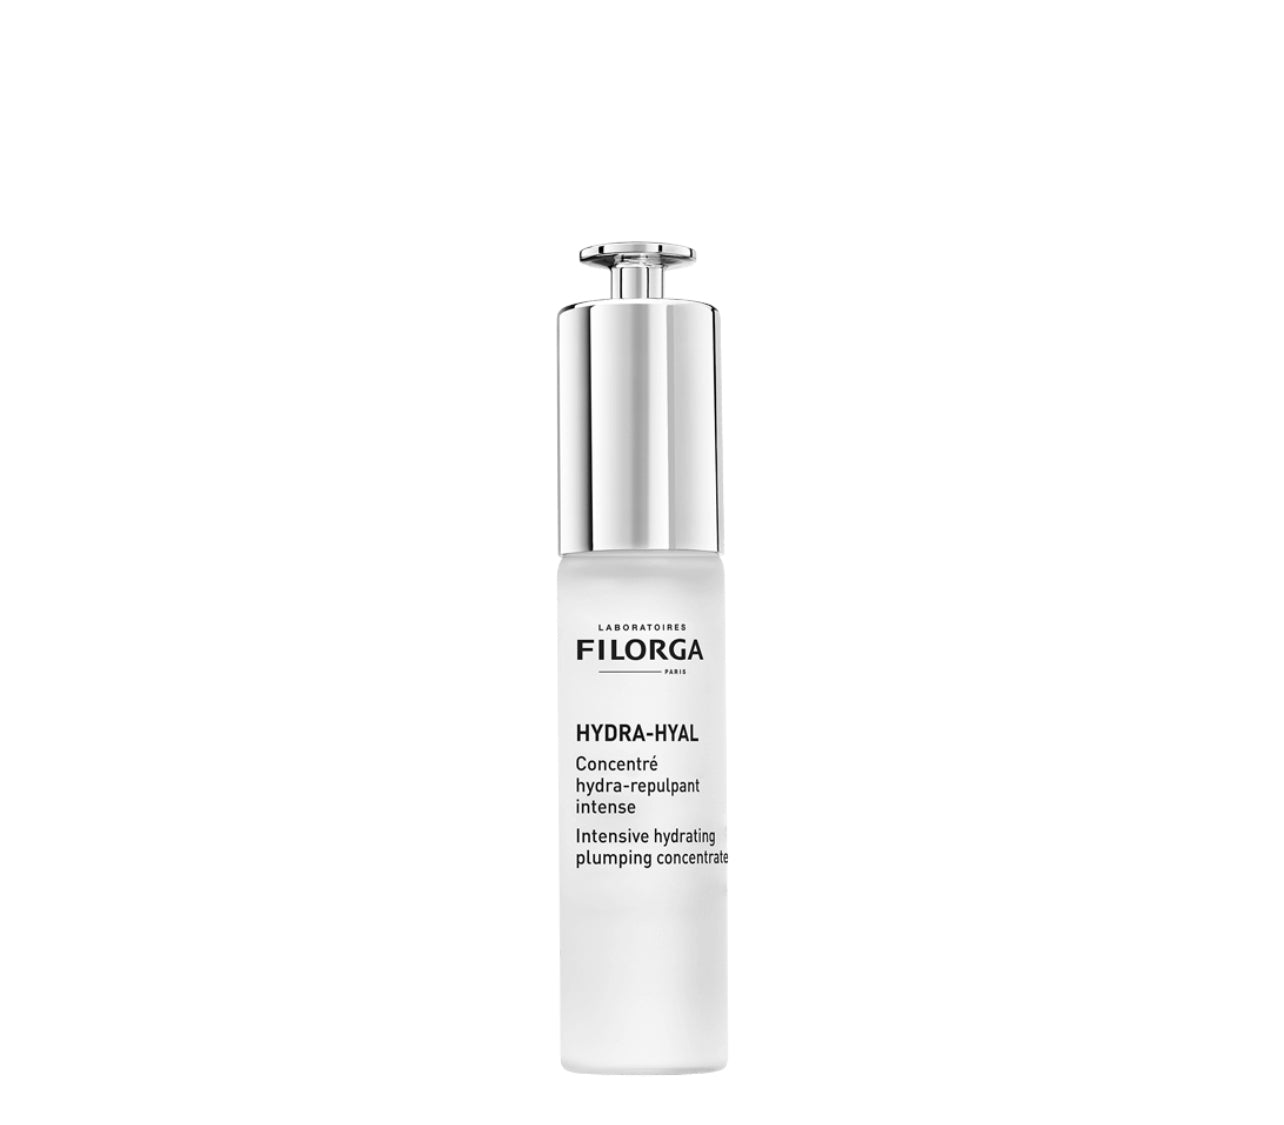 FILORGA HYDRA-HYAL INTENSIVE HYDRATING PLUMPING CONCENTRATE